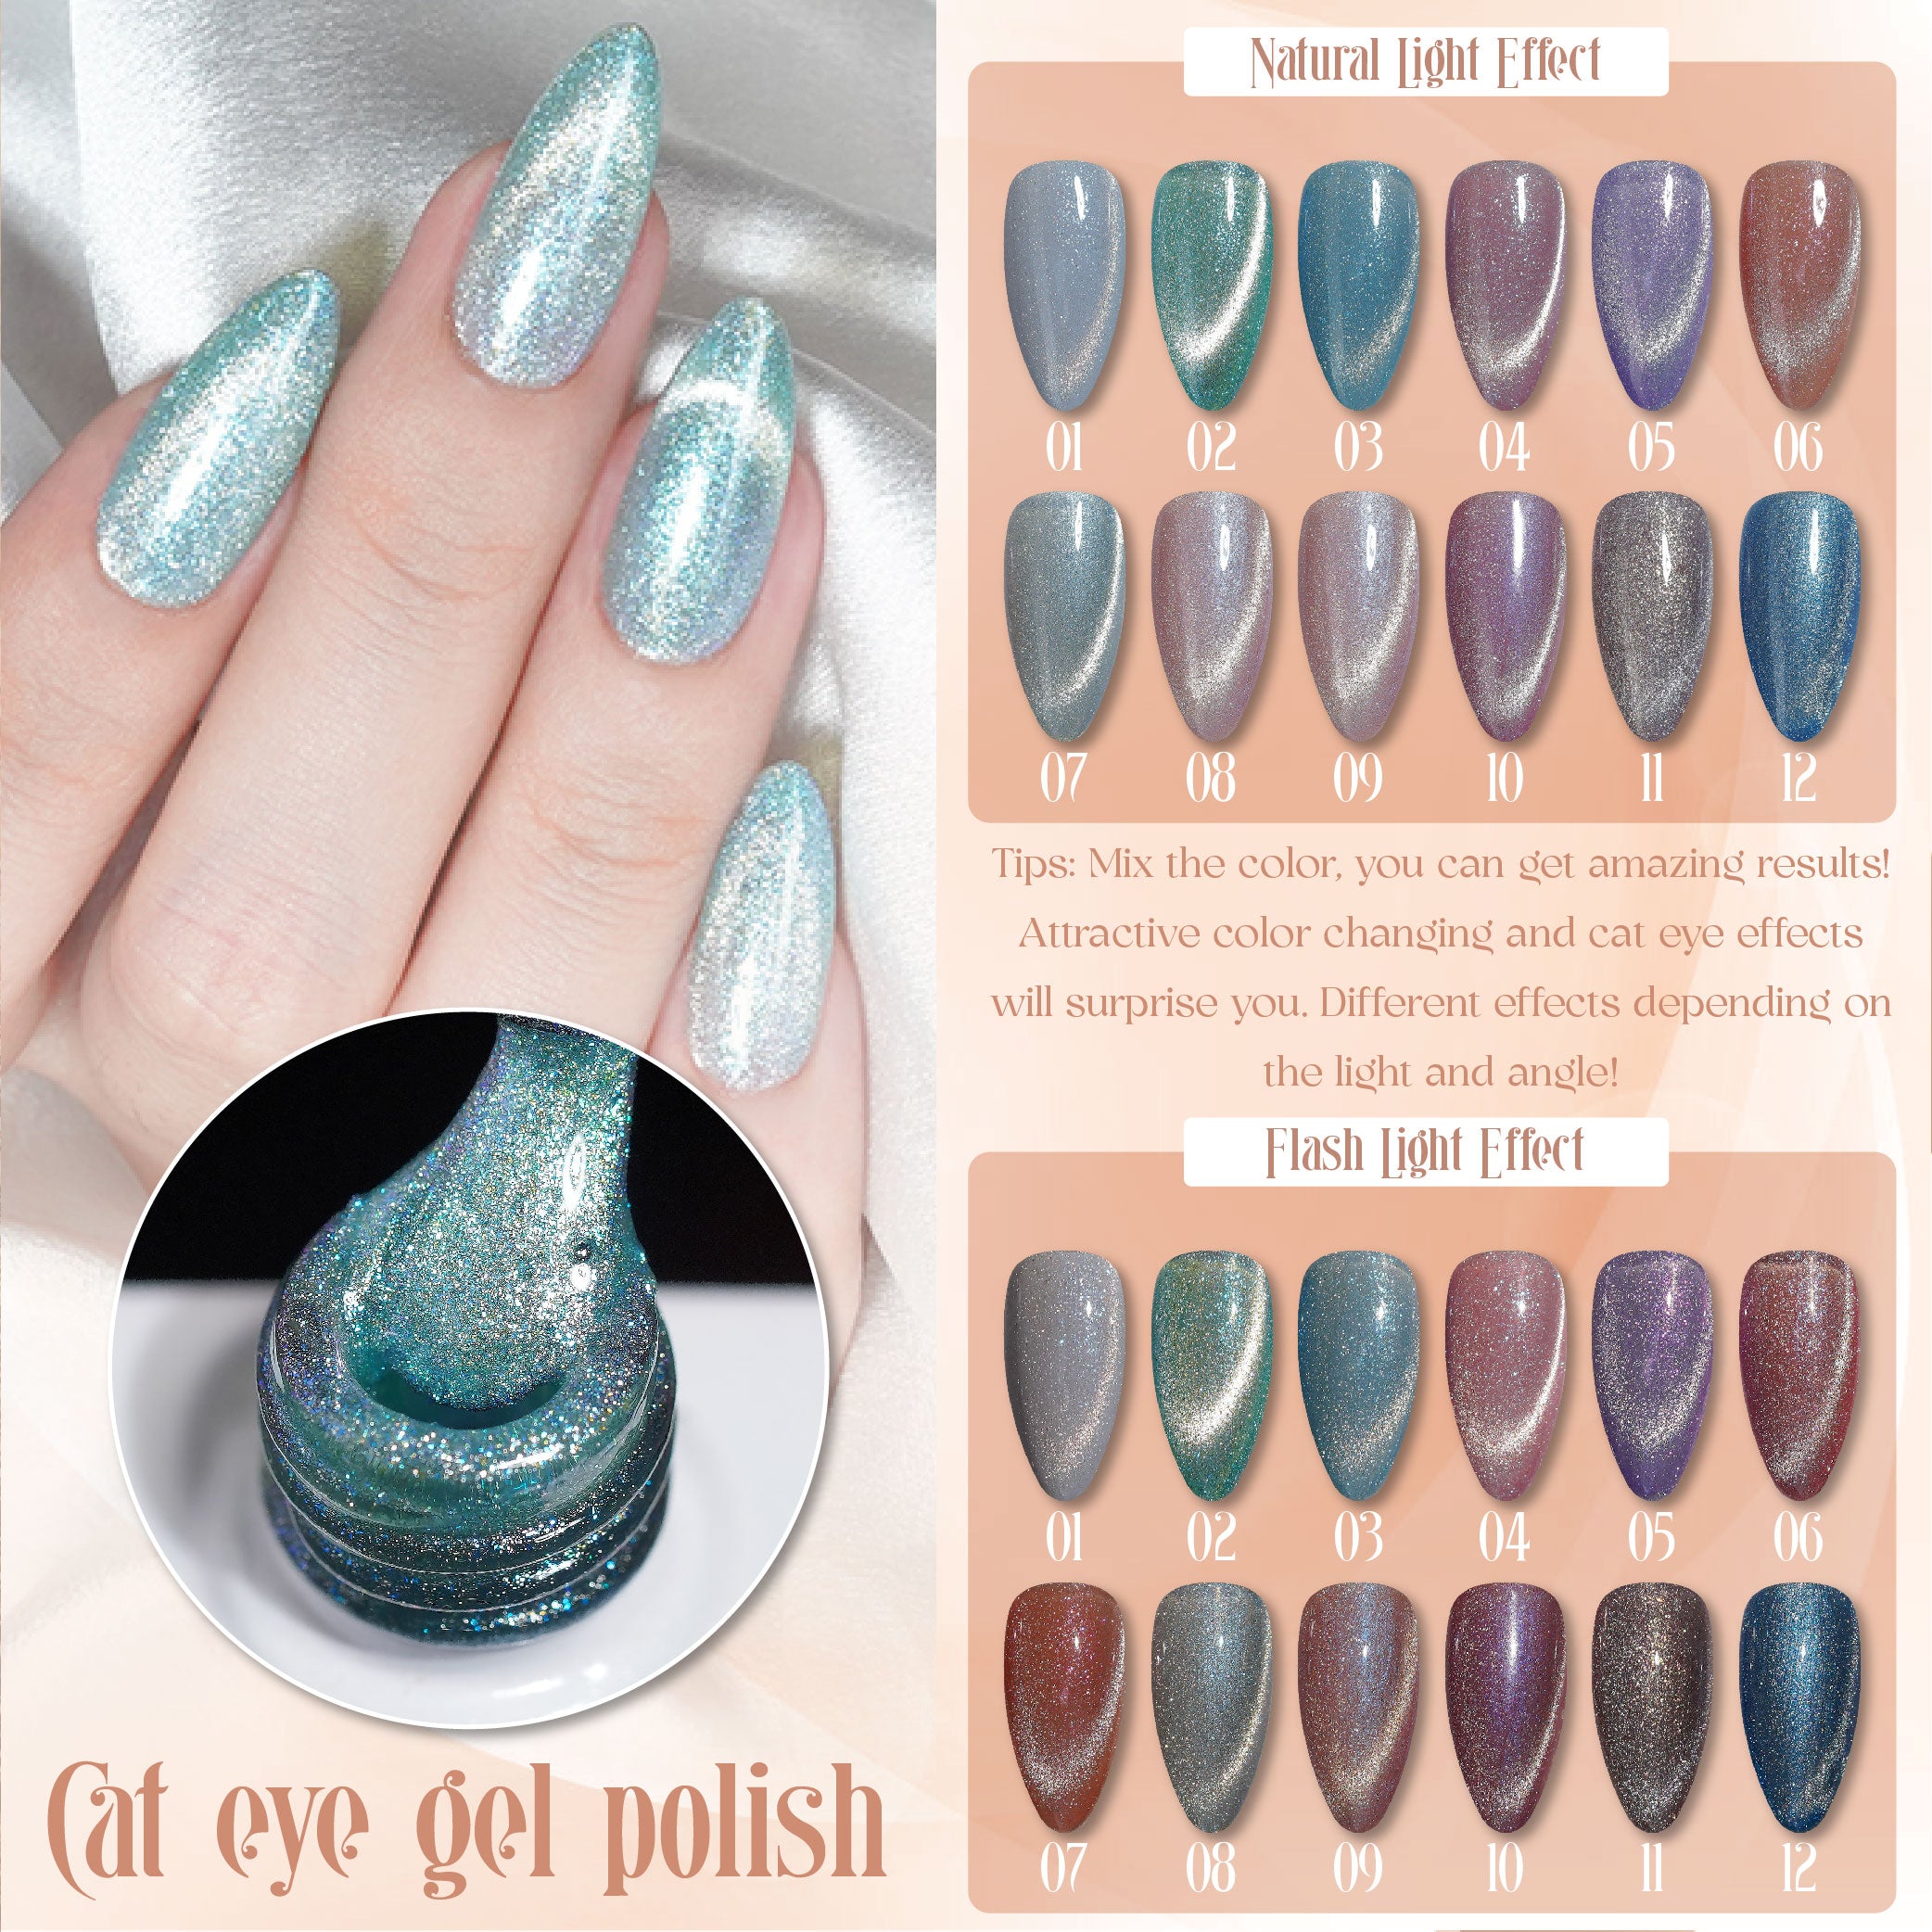 LAVIS Cat Eyes CE11 - 02 - Gel Polish 0.5 oz - Enchanted Spell Collection